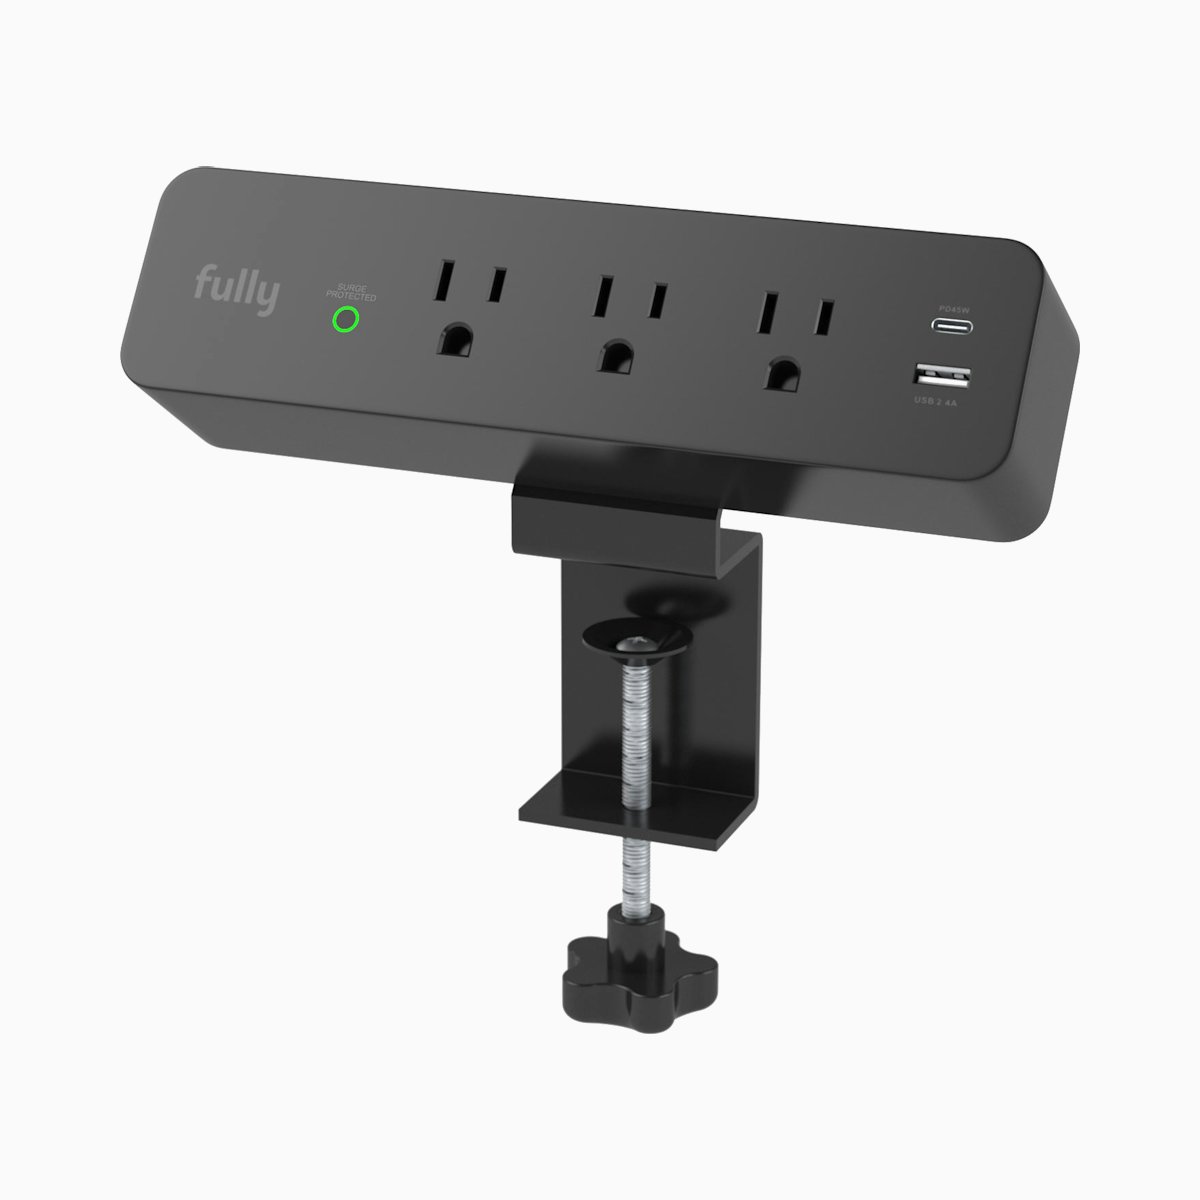 Fully Clamp-Mounted Surge Protector